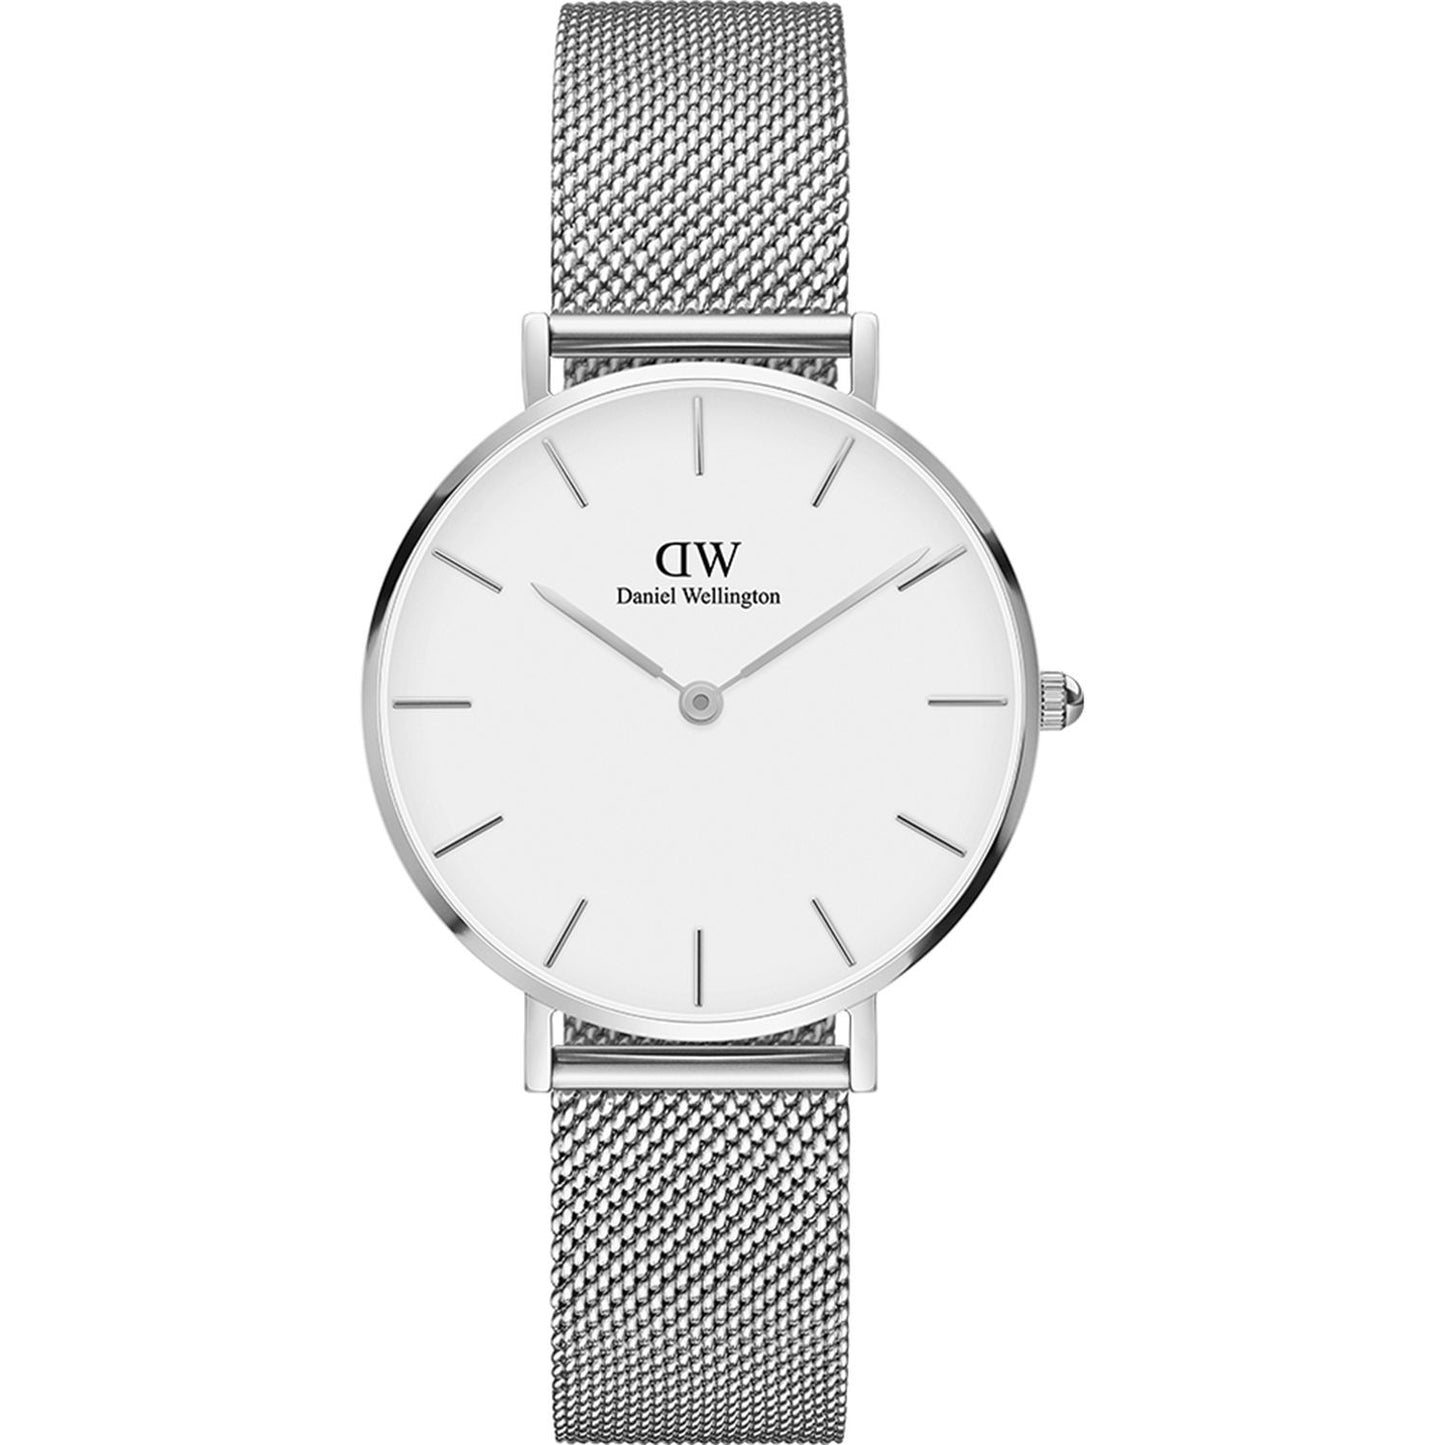 Dw Classic Silver 32mm - London Time Watches 